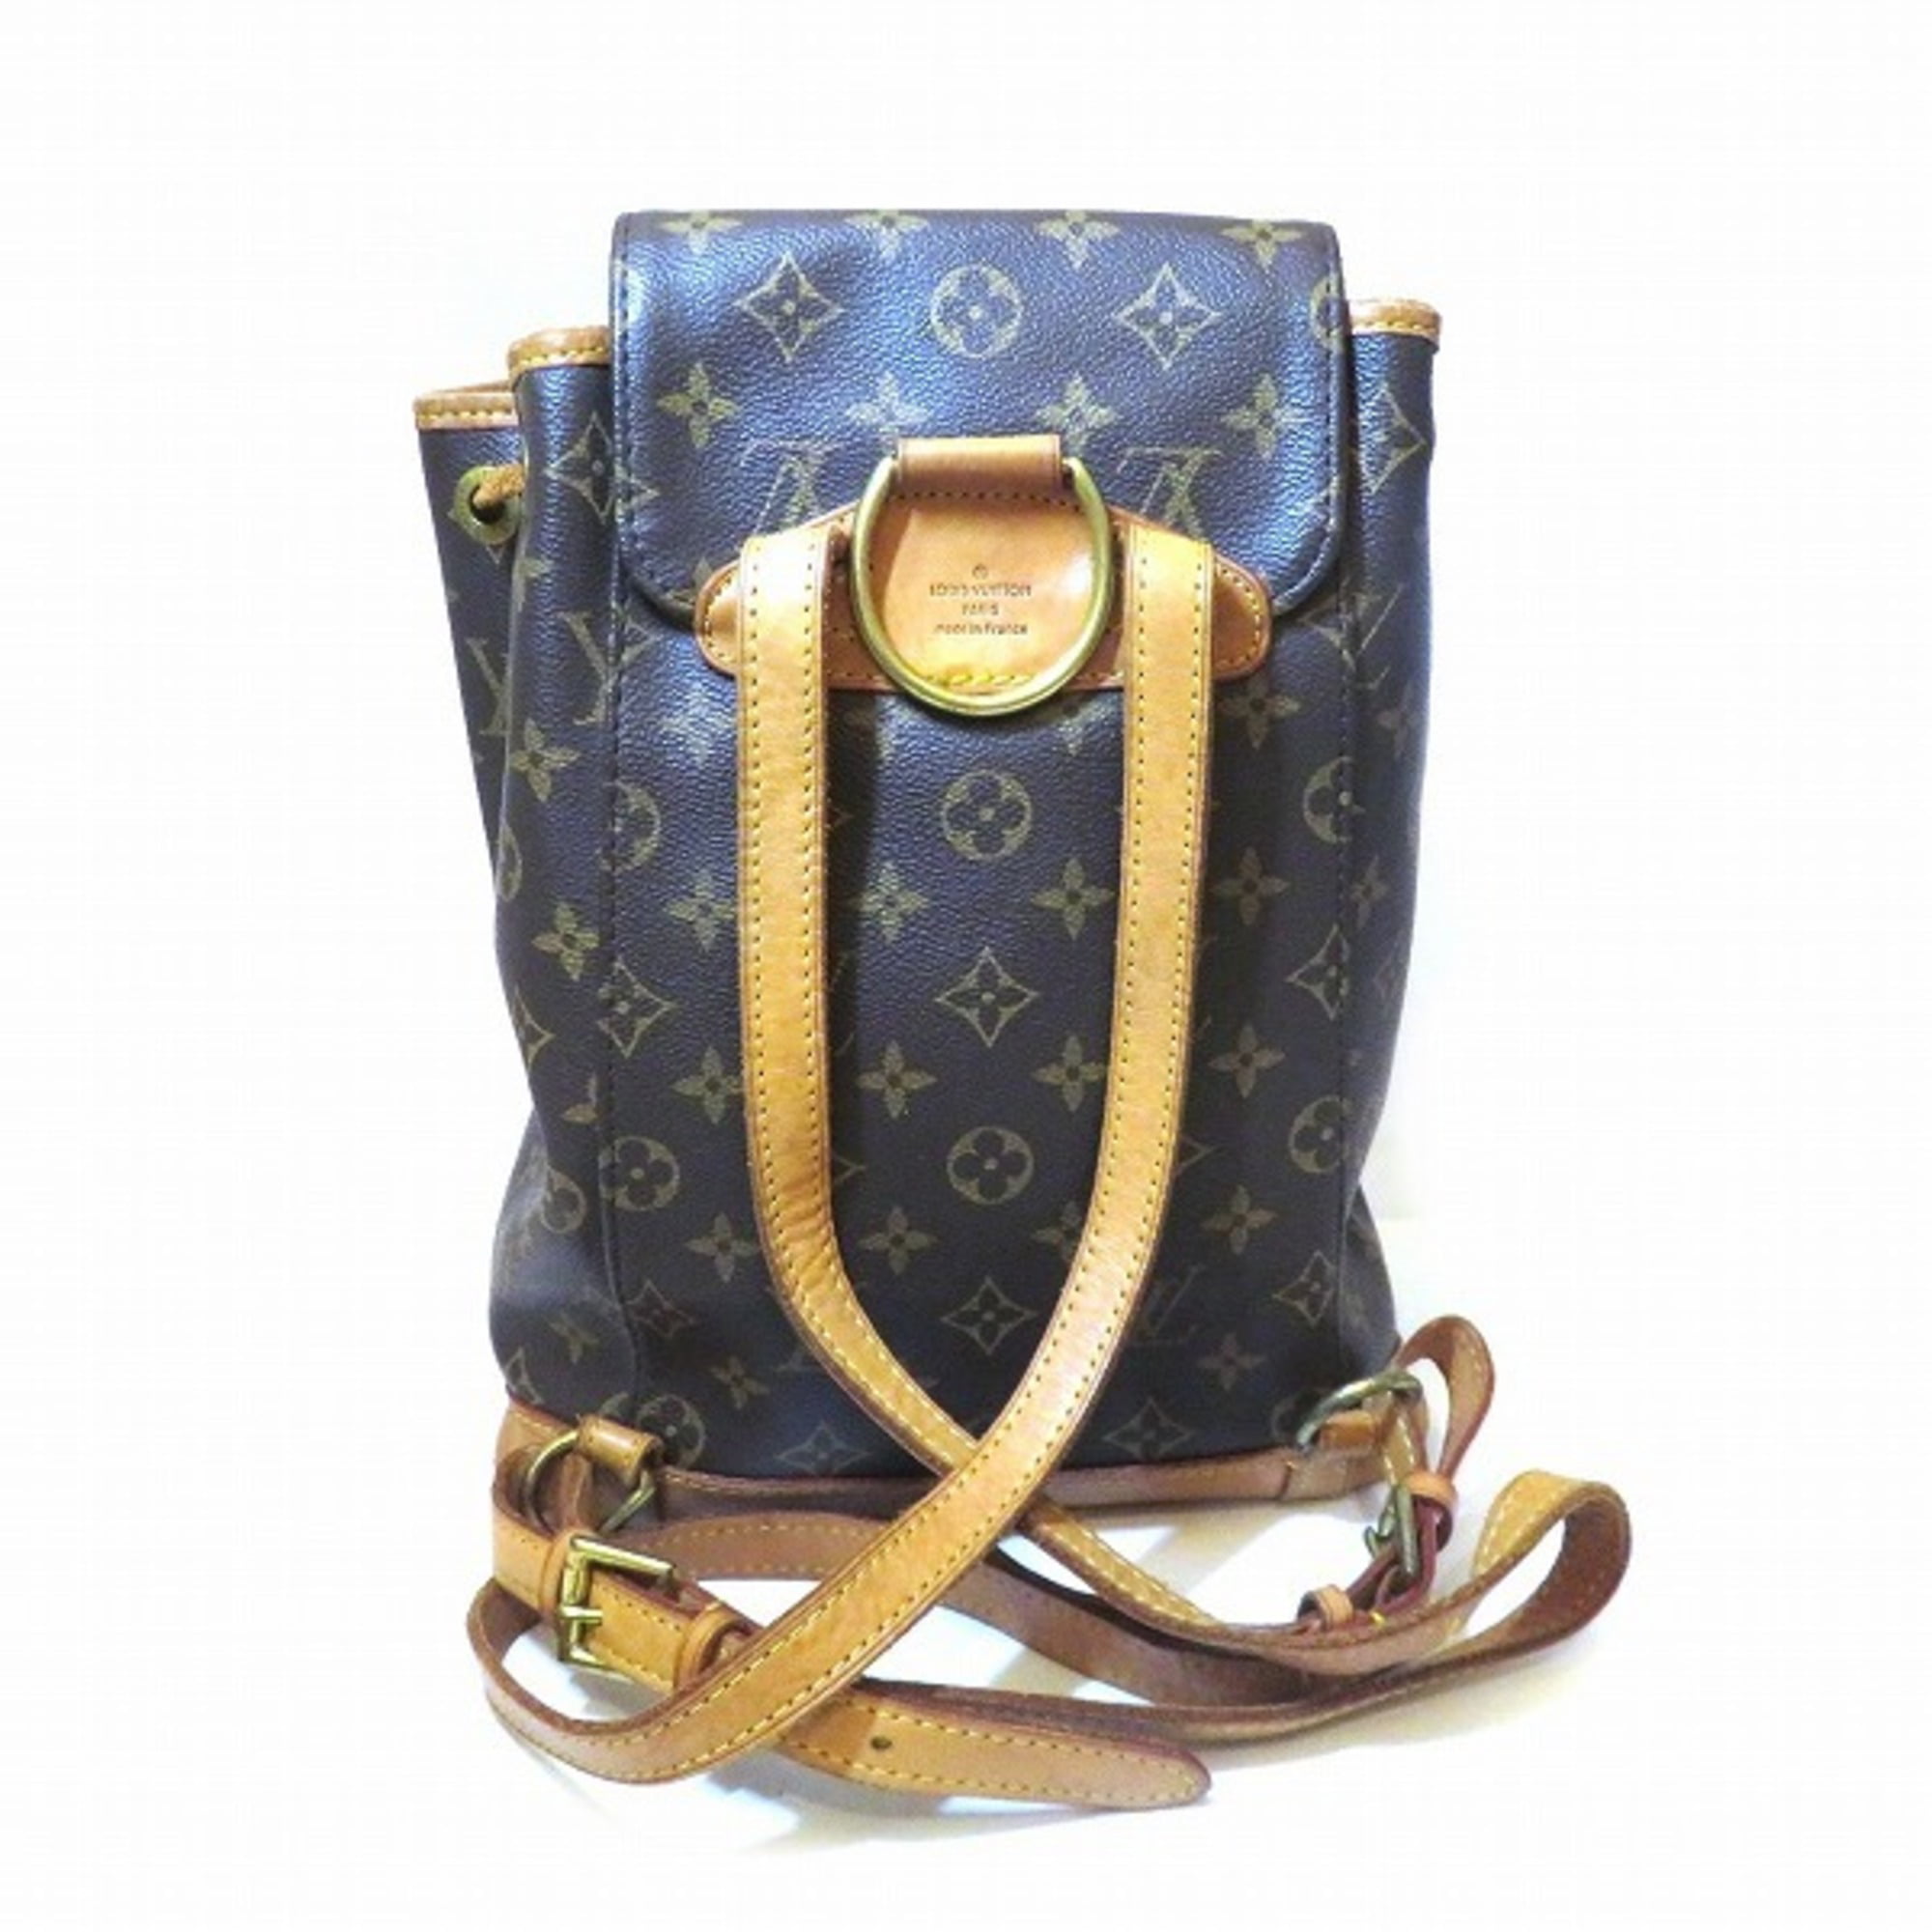 Monogram Montsouris MM Backpack (Authentic Pre-Owned) – The Lady Bag